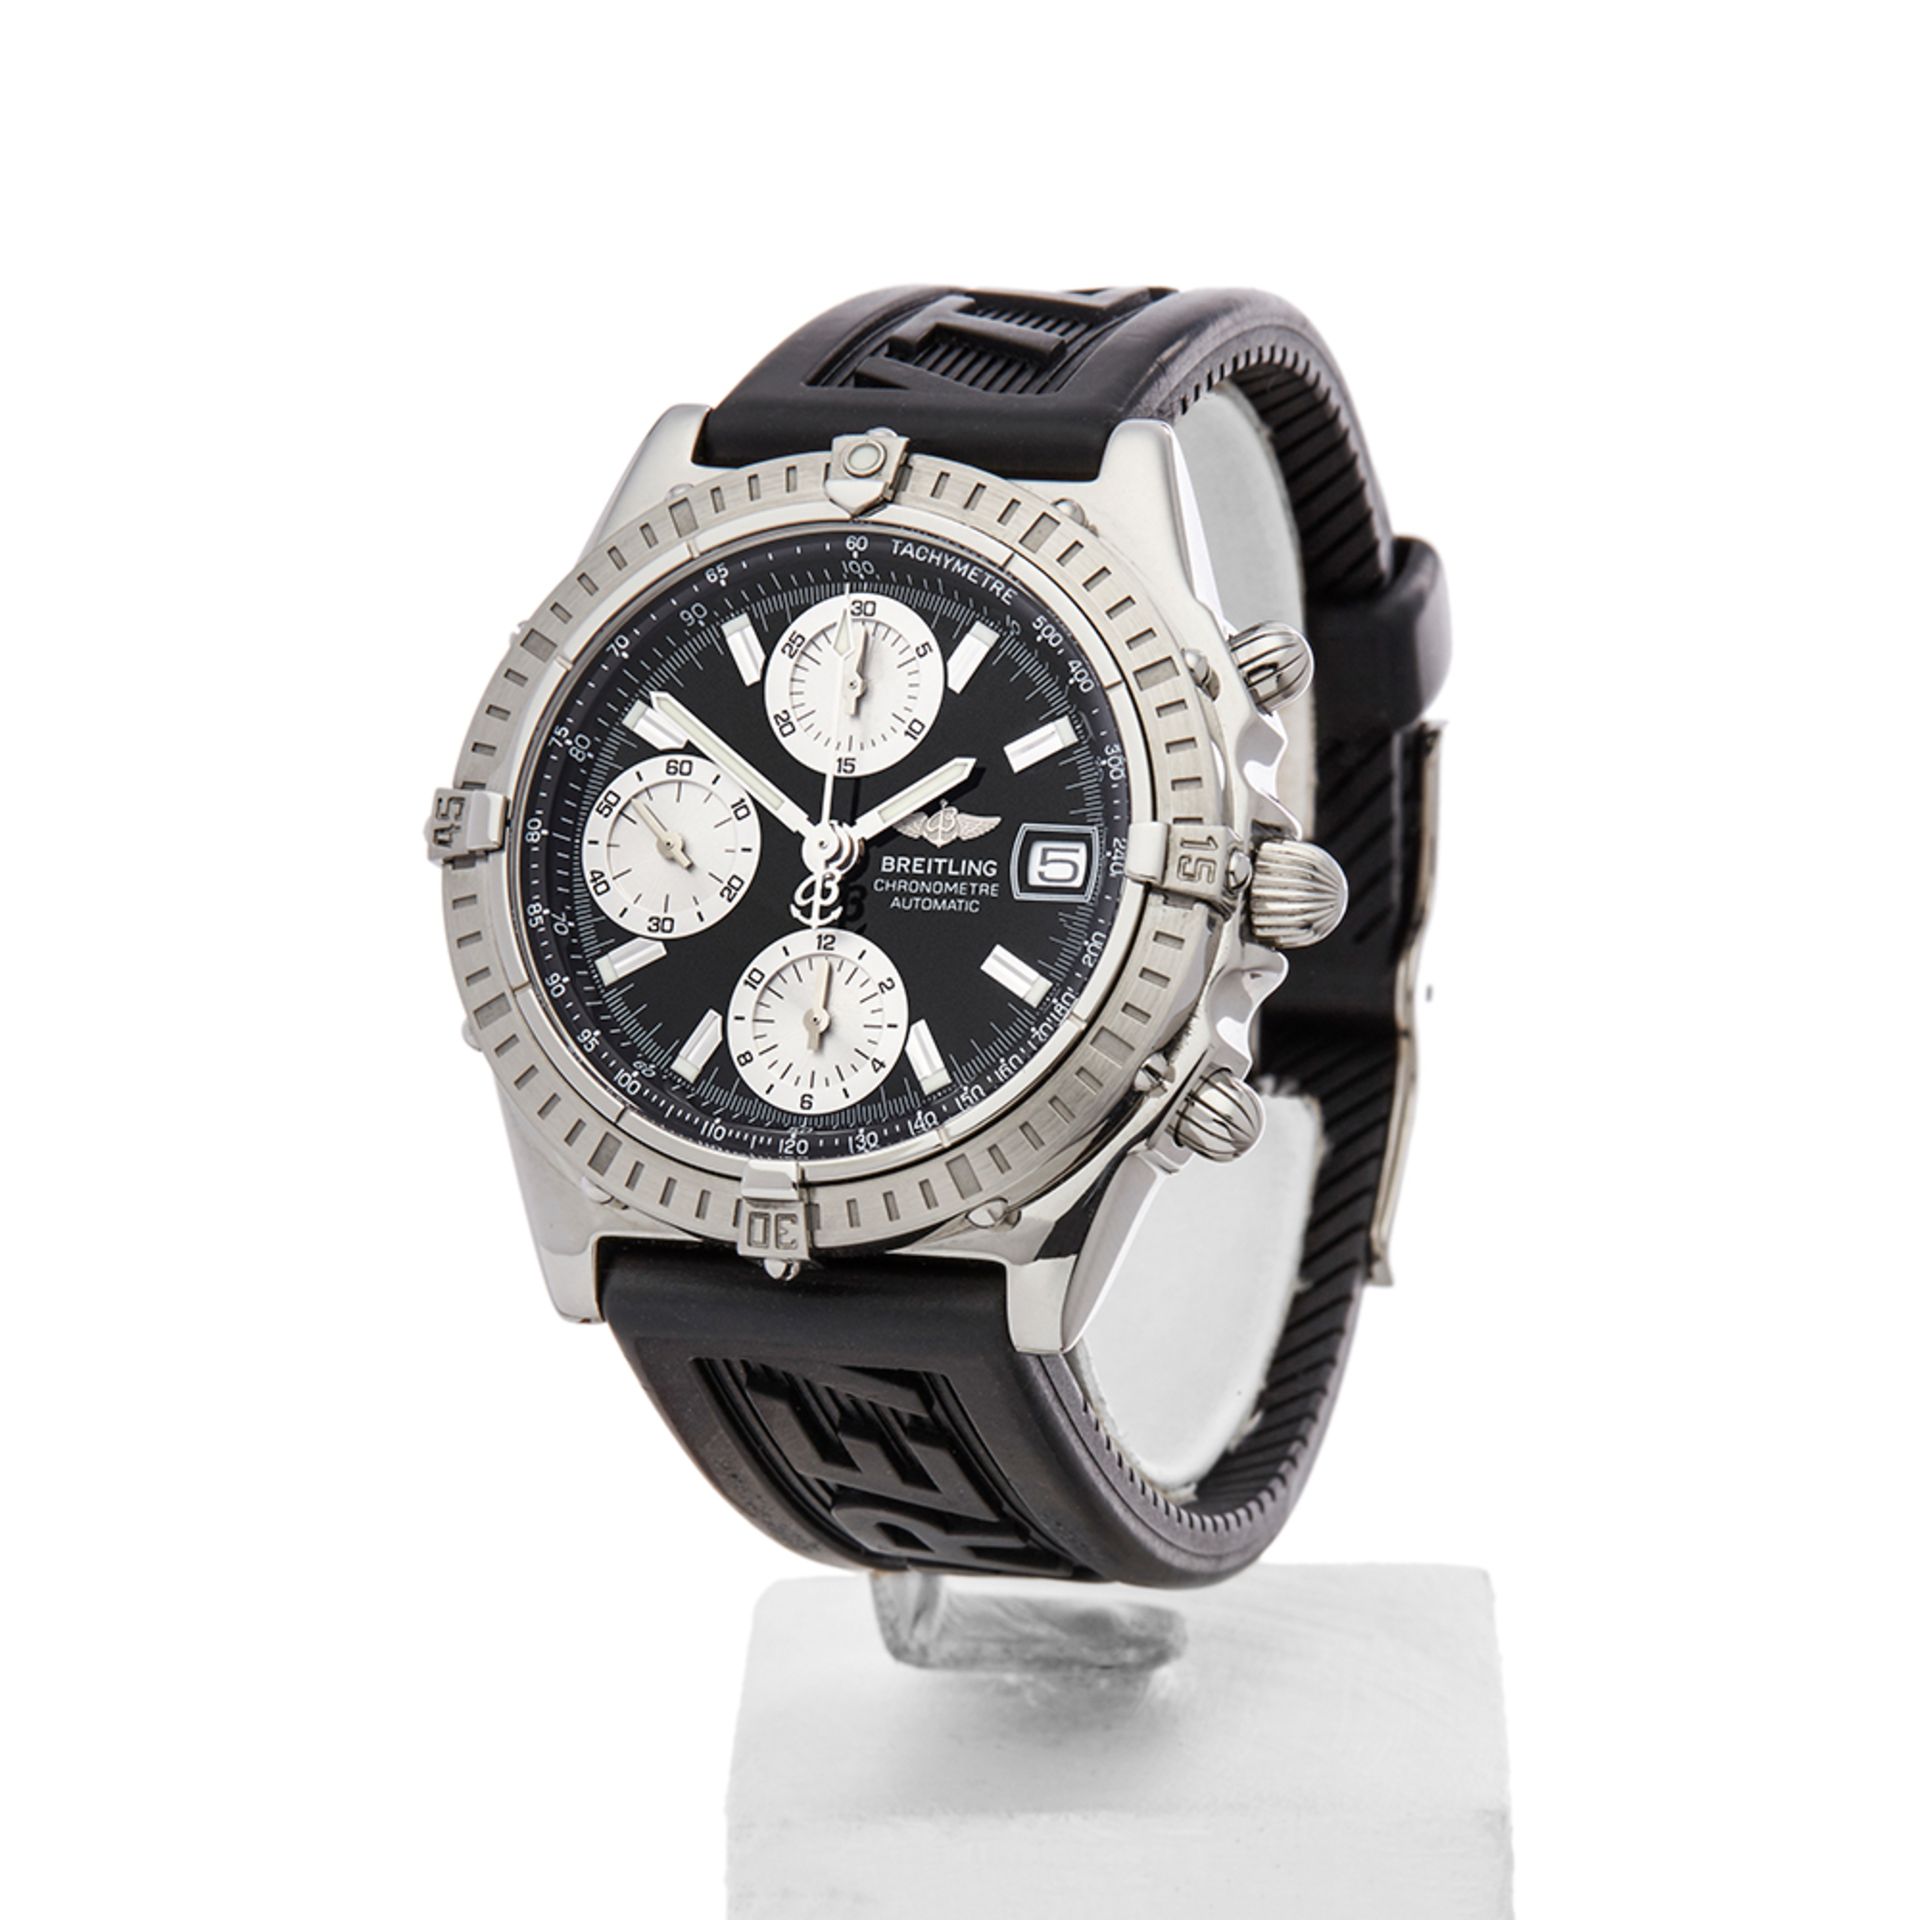 Breitling Chronomat Chronograph 39mm Stainless Steel - A13352 - Image 3 of 8